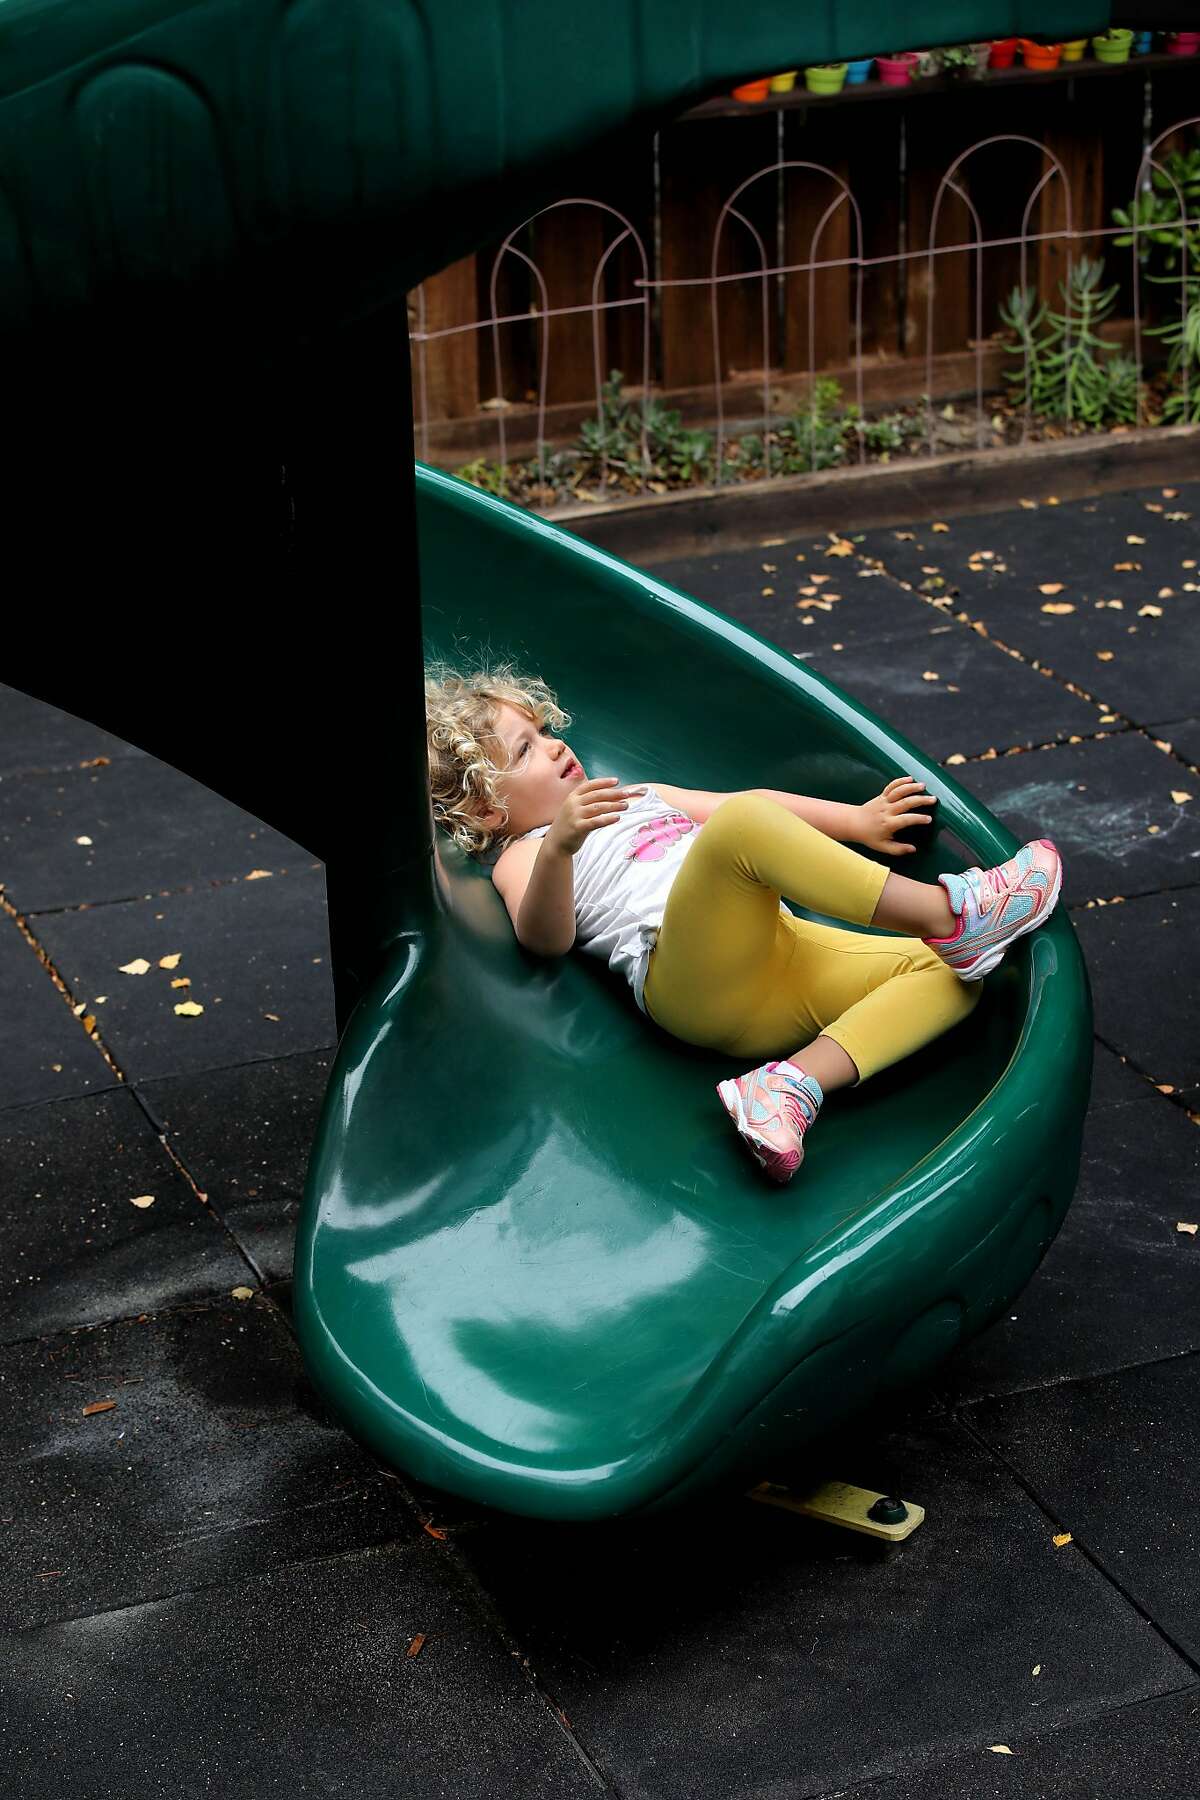 A preschooler comes down a slide at Rockridge Little School on Tuesday, July 21, 2020, in Oakland, Calif. As the pandemic surges and cities and counties stumble through the stop-start process of reopening, the childcare industry -- a vital crutch for many working parents -- appears to be on the verge of collapse. A new report from UC Berkeley serves as a grim I-told-you-so moment for centers and other providers who warned in the spring that long closures, confusing guidelines and heavy restrictions would devastate their already precarious financial models. Parents need childcare to return to work, and many may seek these programs now to fill in for closed public schools. But providers are closing or barely hanging on. Of 953 childcares surveyed for the report, 21% said they had missed a rent or mortgage payment during the pandemic, 81% are operating with fewer children, and 80% have higher cleaning costs.